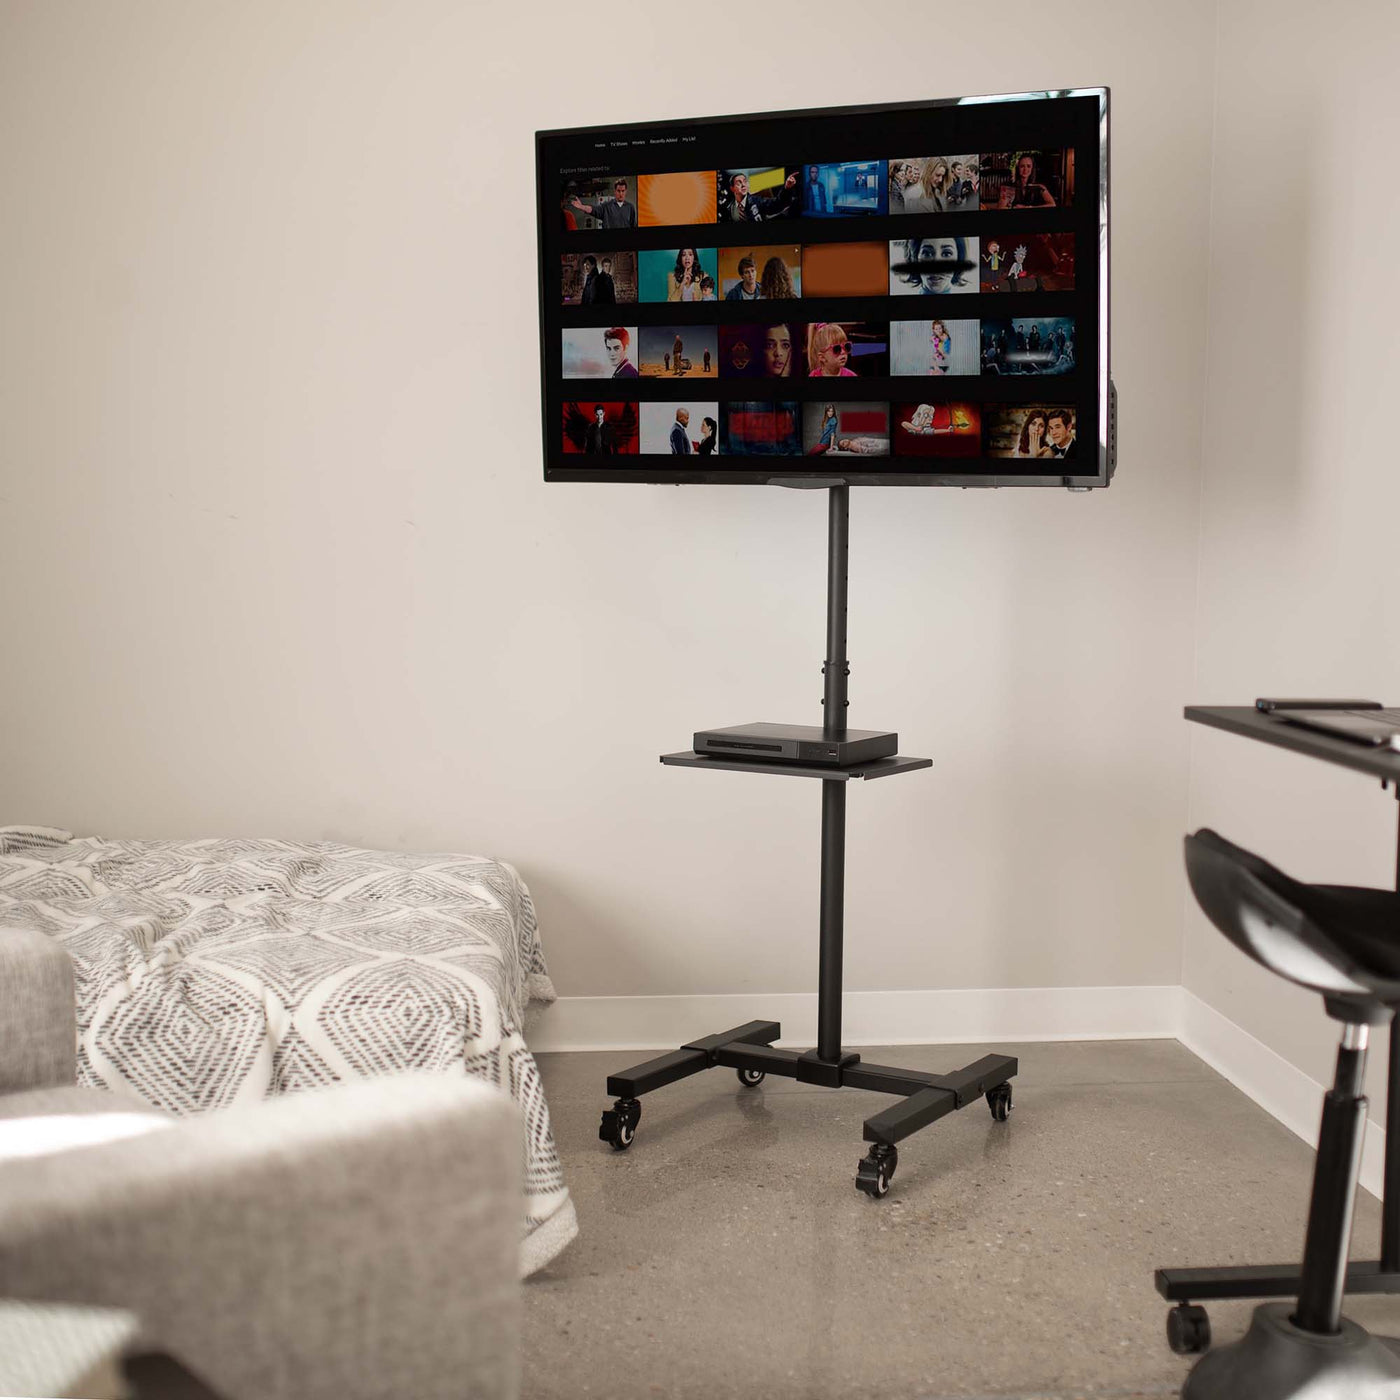 Sturdy mobile height adjustable TV cart with utility shelf and wheels.